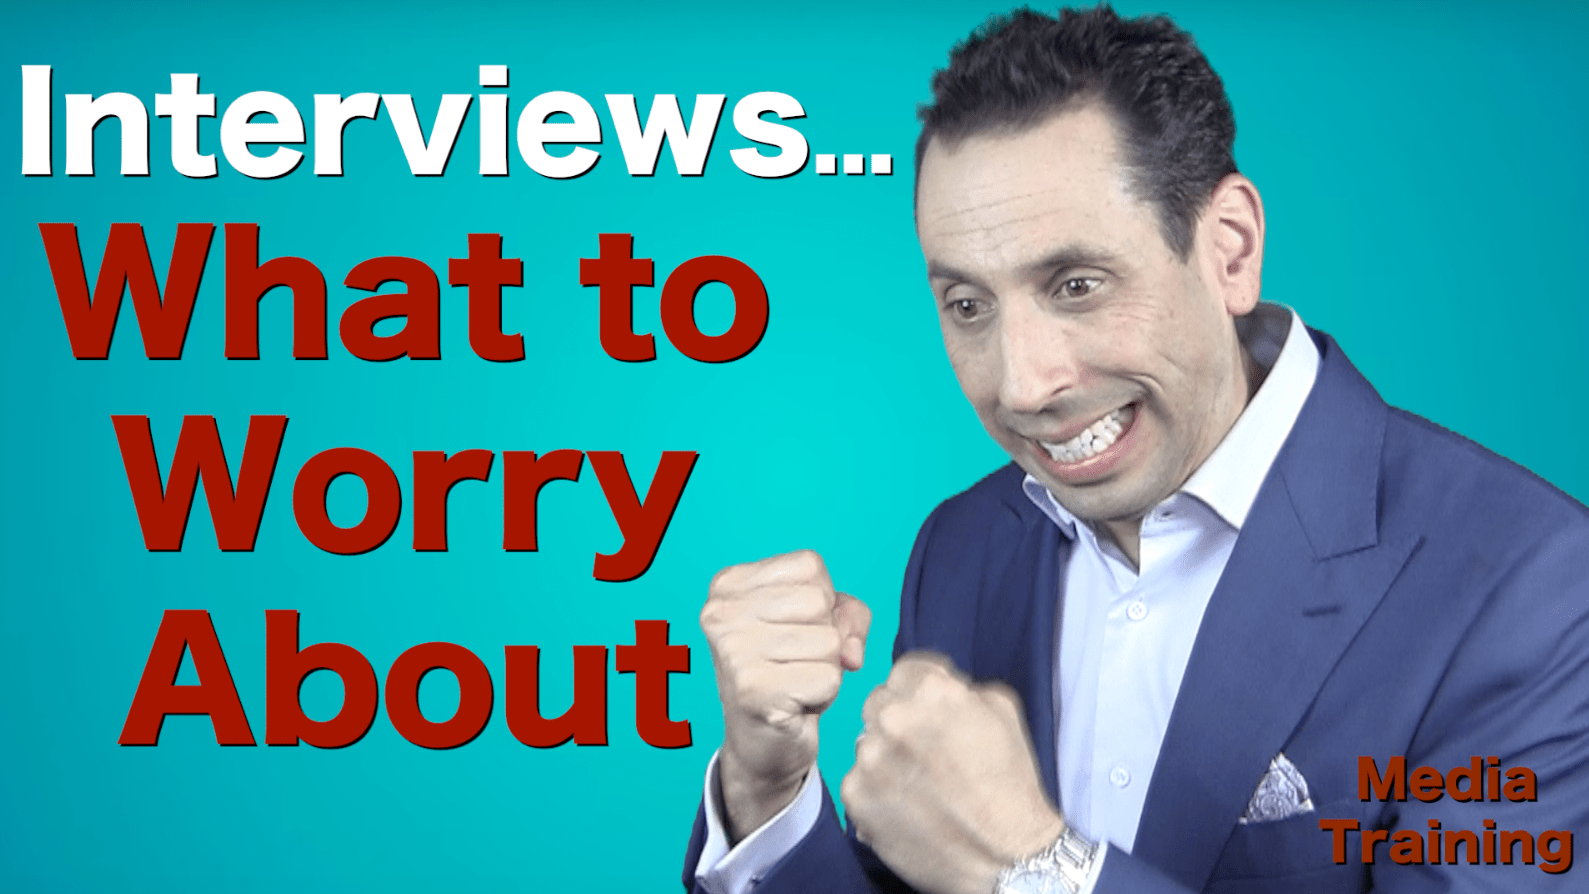 Media Interviews: What Should You Worry About?